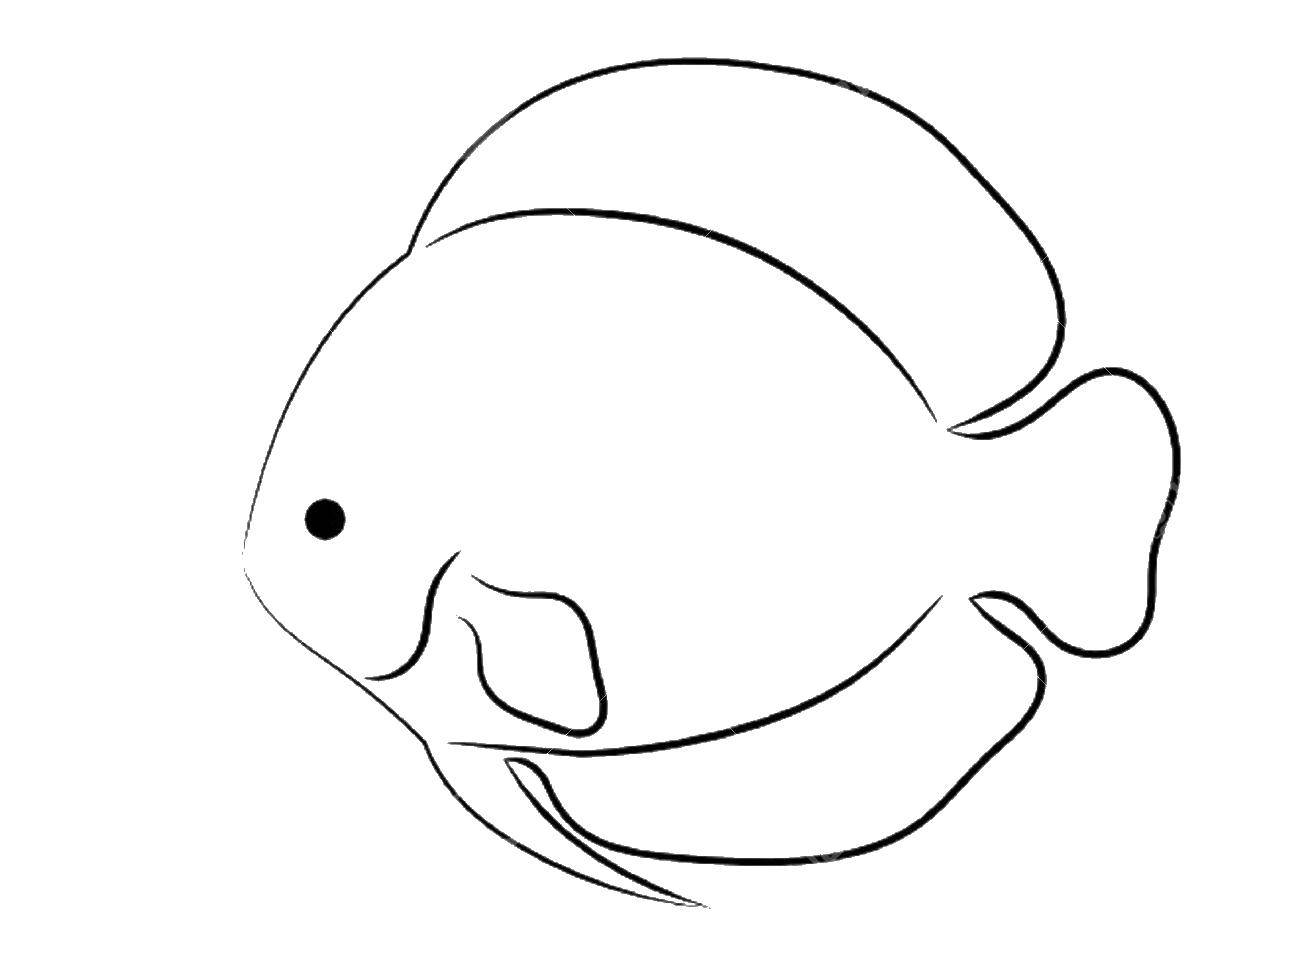 Coloring Fish flounder. Category Contours of fish. Tags:  flounder.